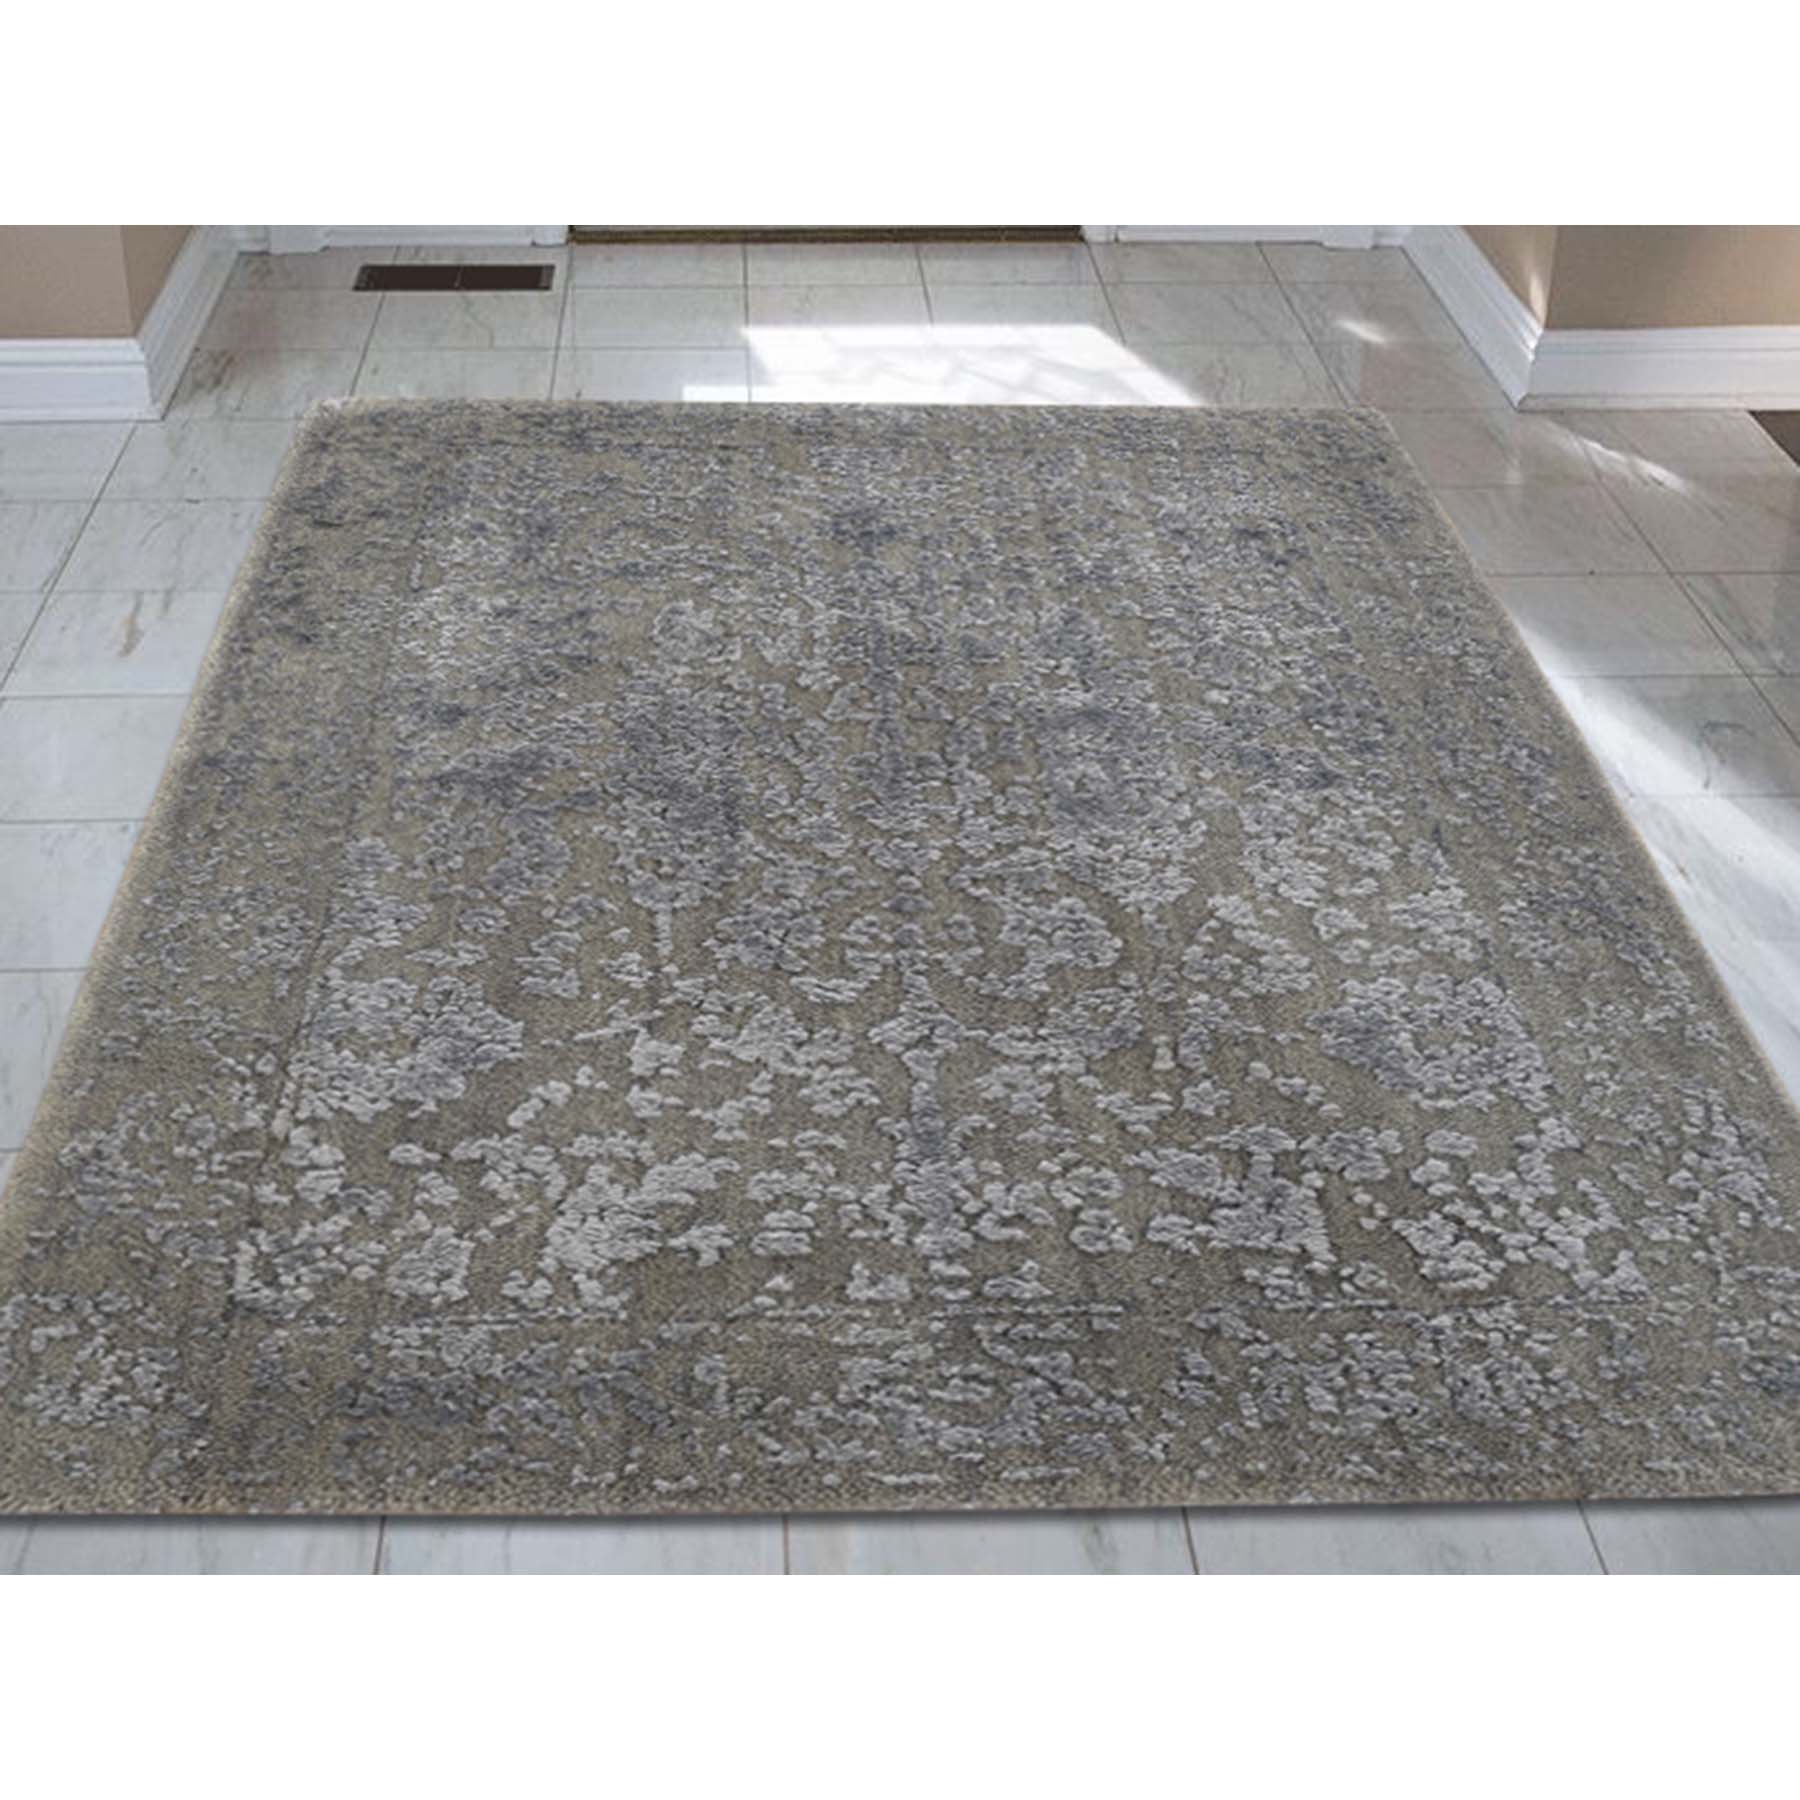 2'x2'10" Tone on Tone Wool and Silk Abstract Design Hand-Loomed Oriental Rug 